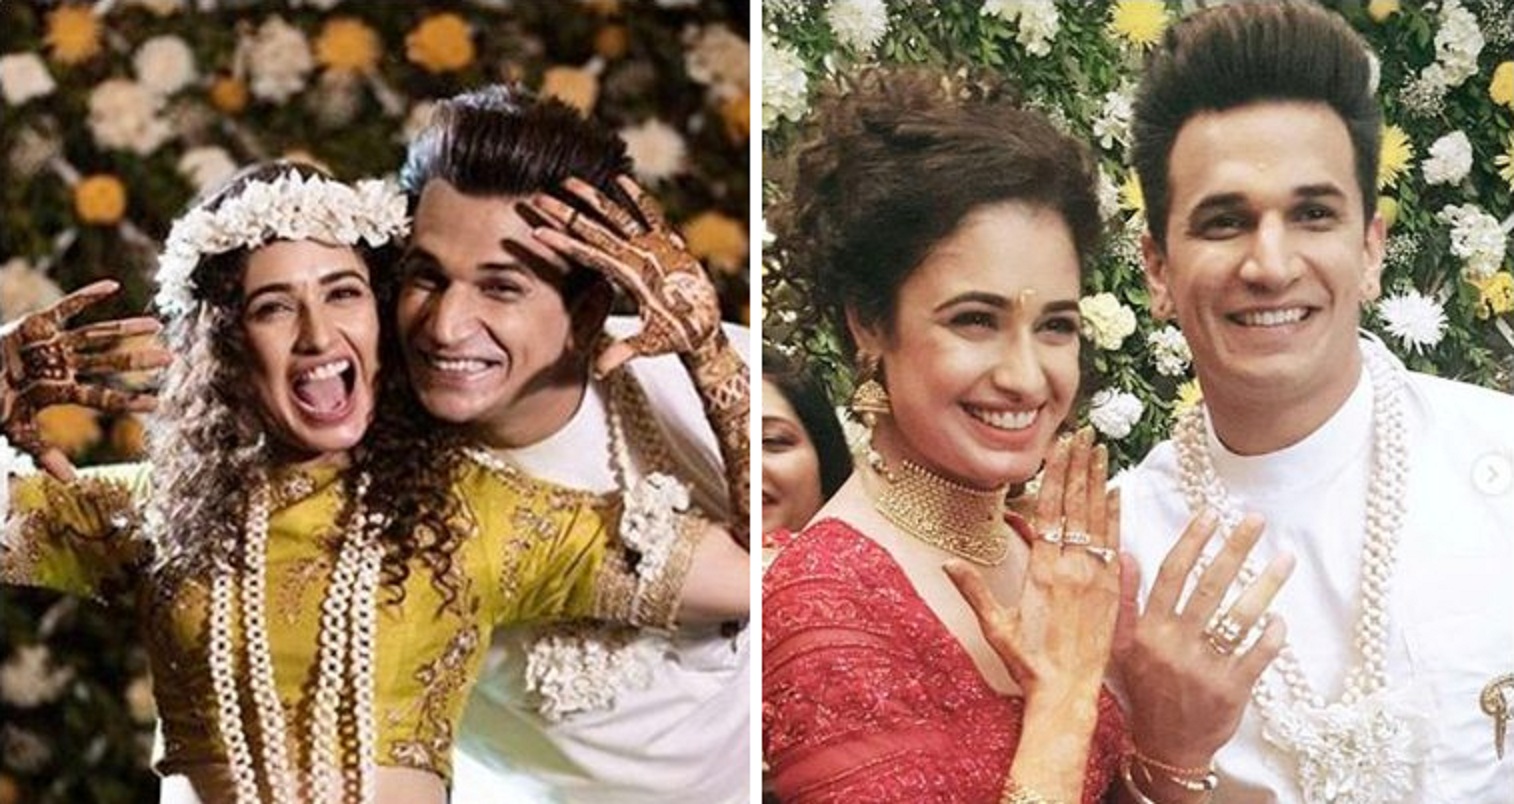 Prince Narula and Yuvika Chaudhary Get Engaged in a Fairy-Tale Like Ceremony!